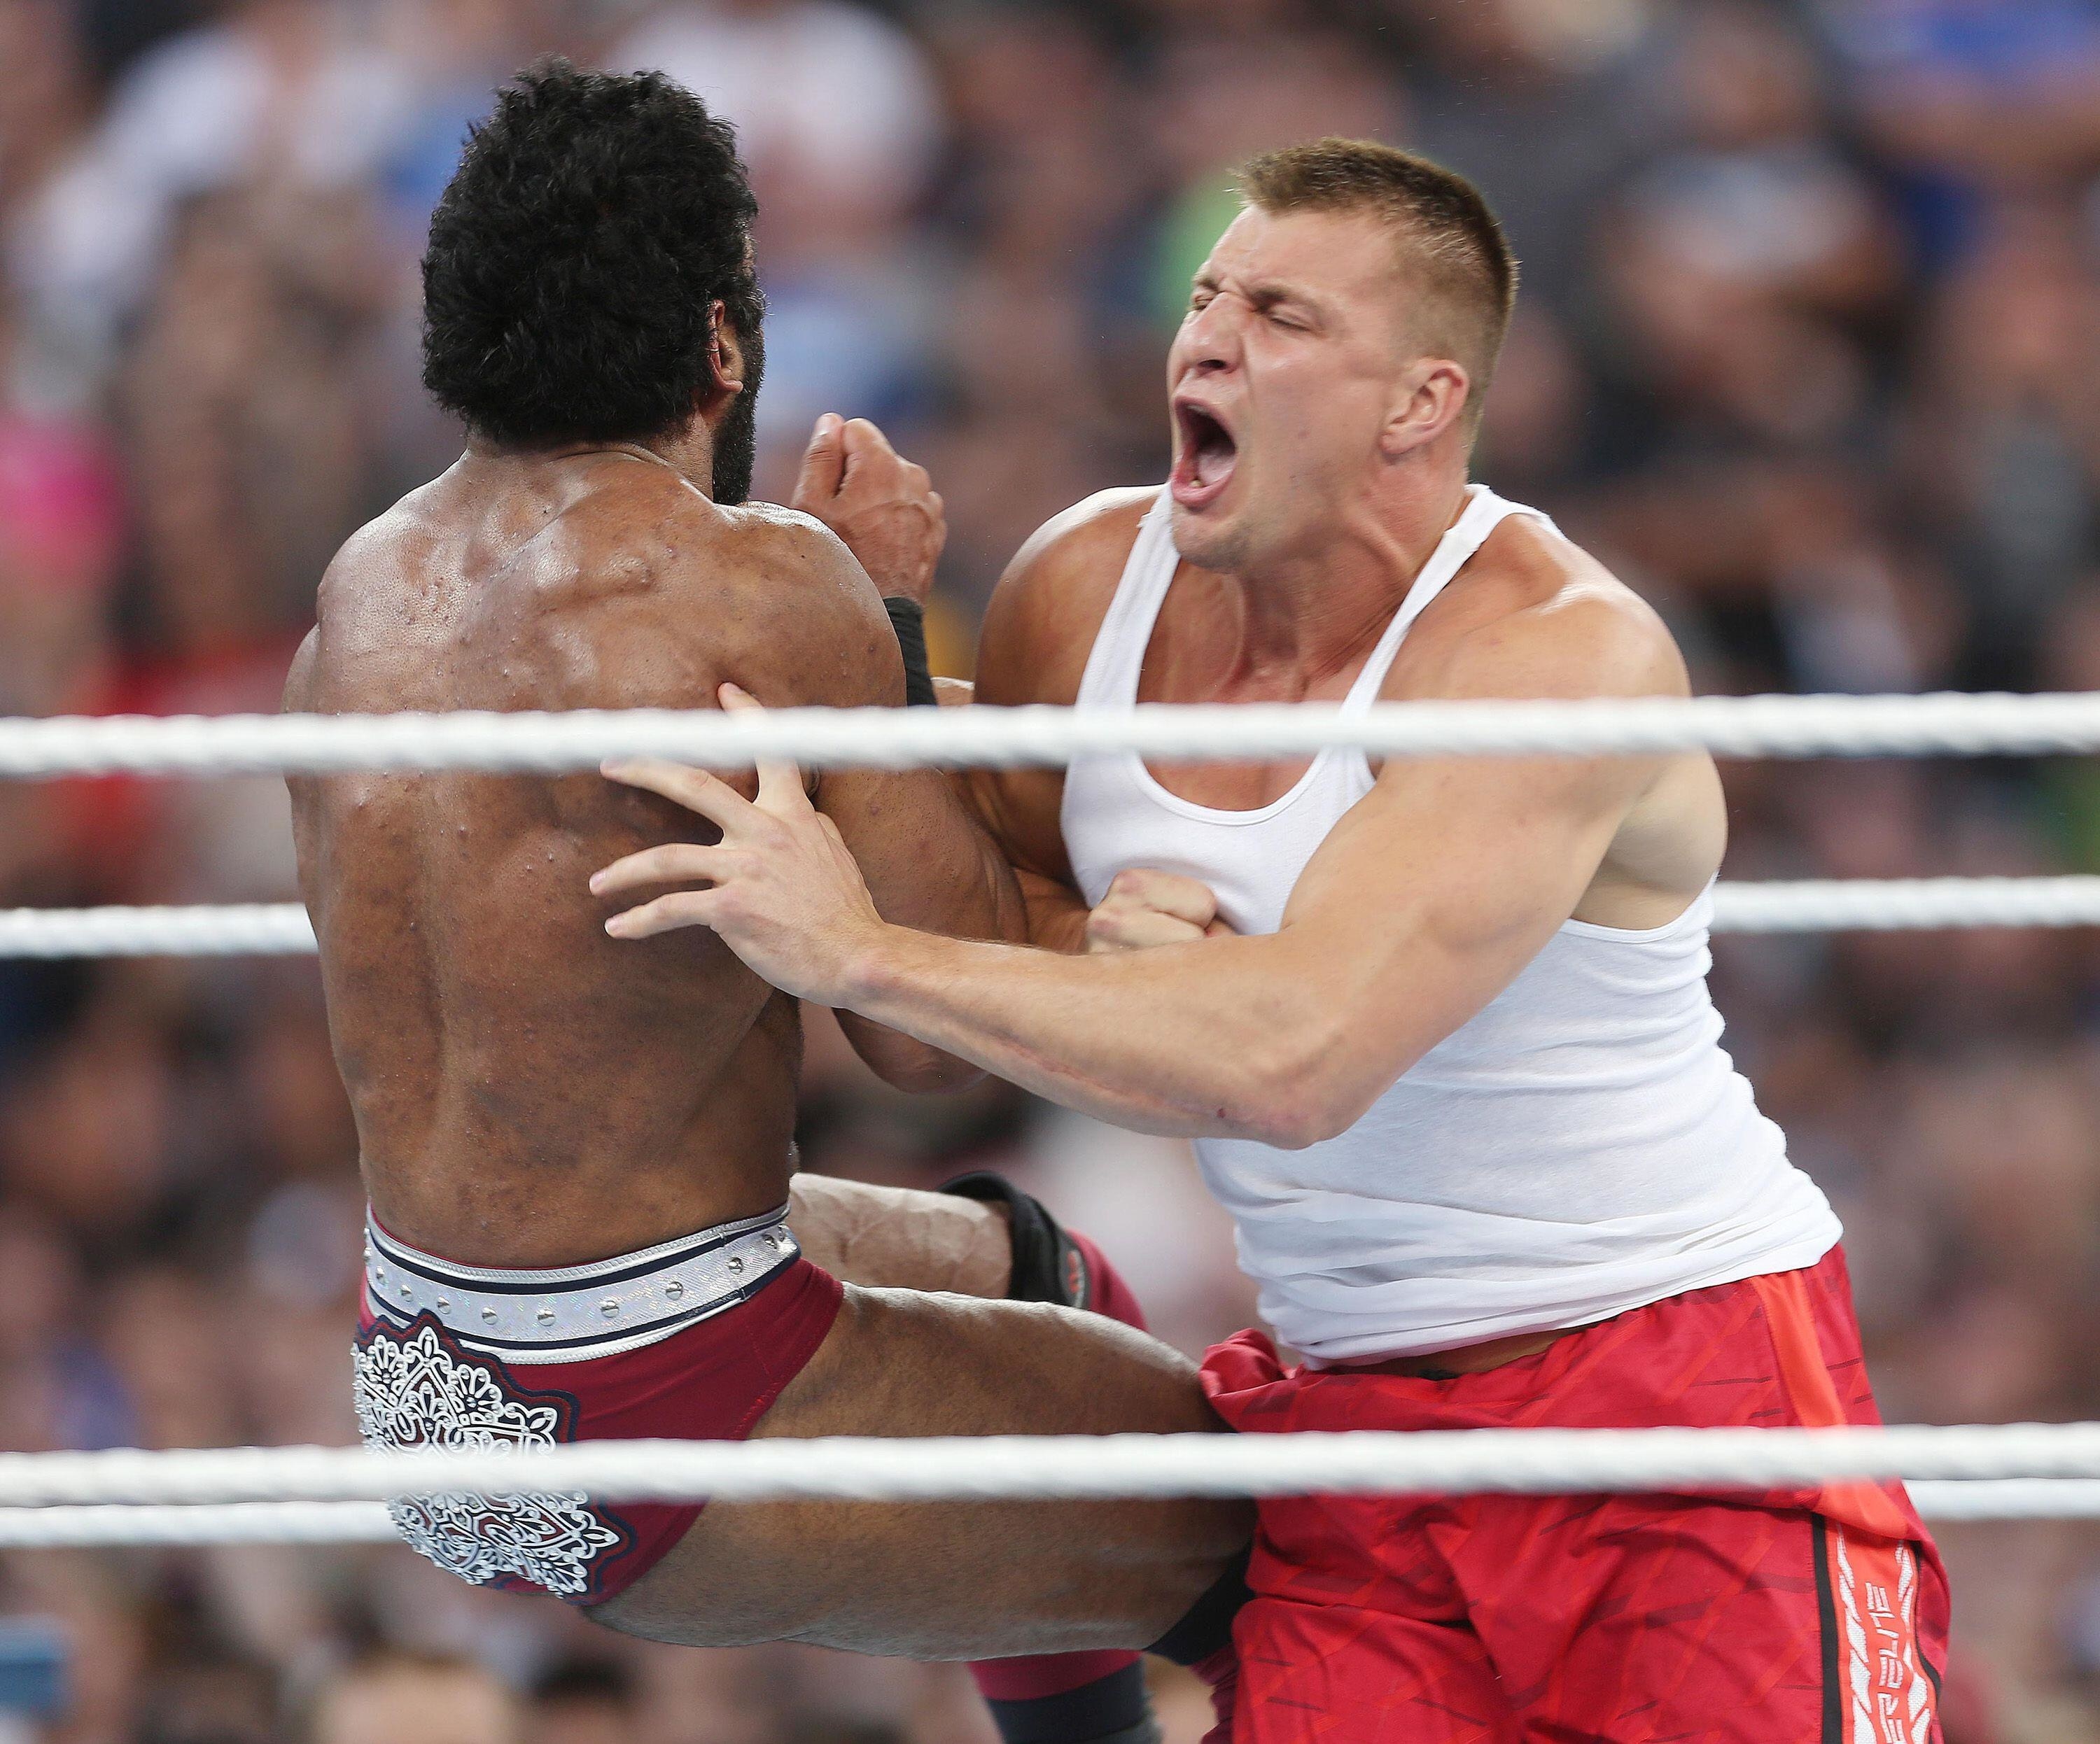 New England Patriots tight end Rob Gronkowski, right, screams as he hits wrestler Jinder Mahal, left, in the ring during WrestleMania 33 on Sunday, April 2, 2017 at Camping World Stadium in Orlando, Florida